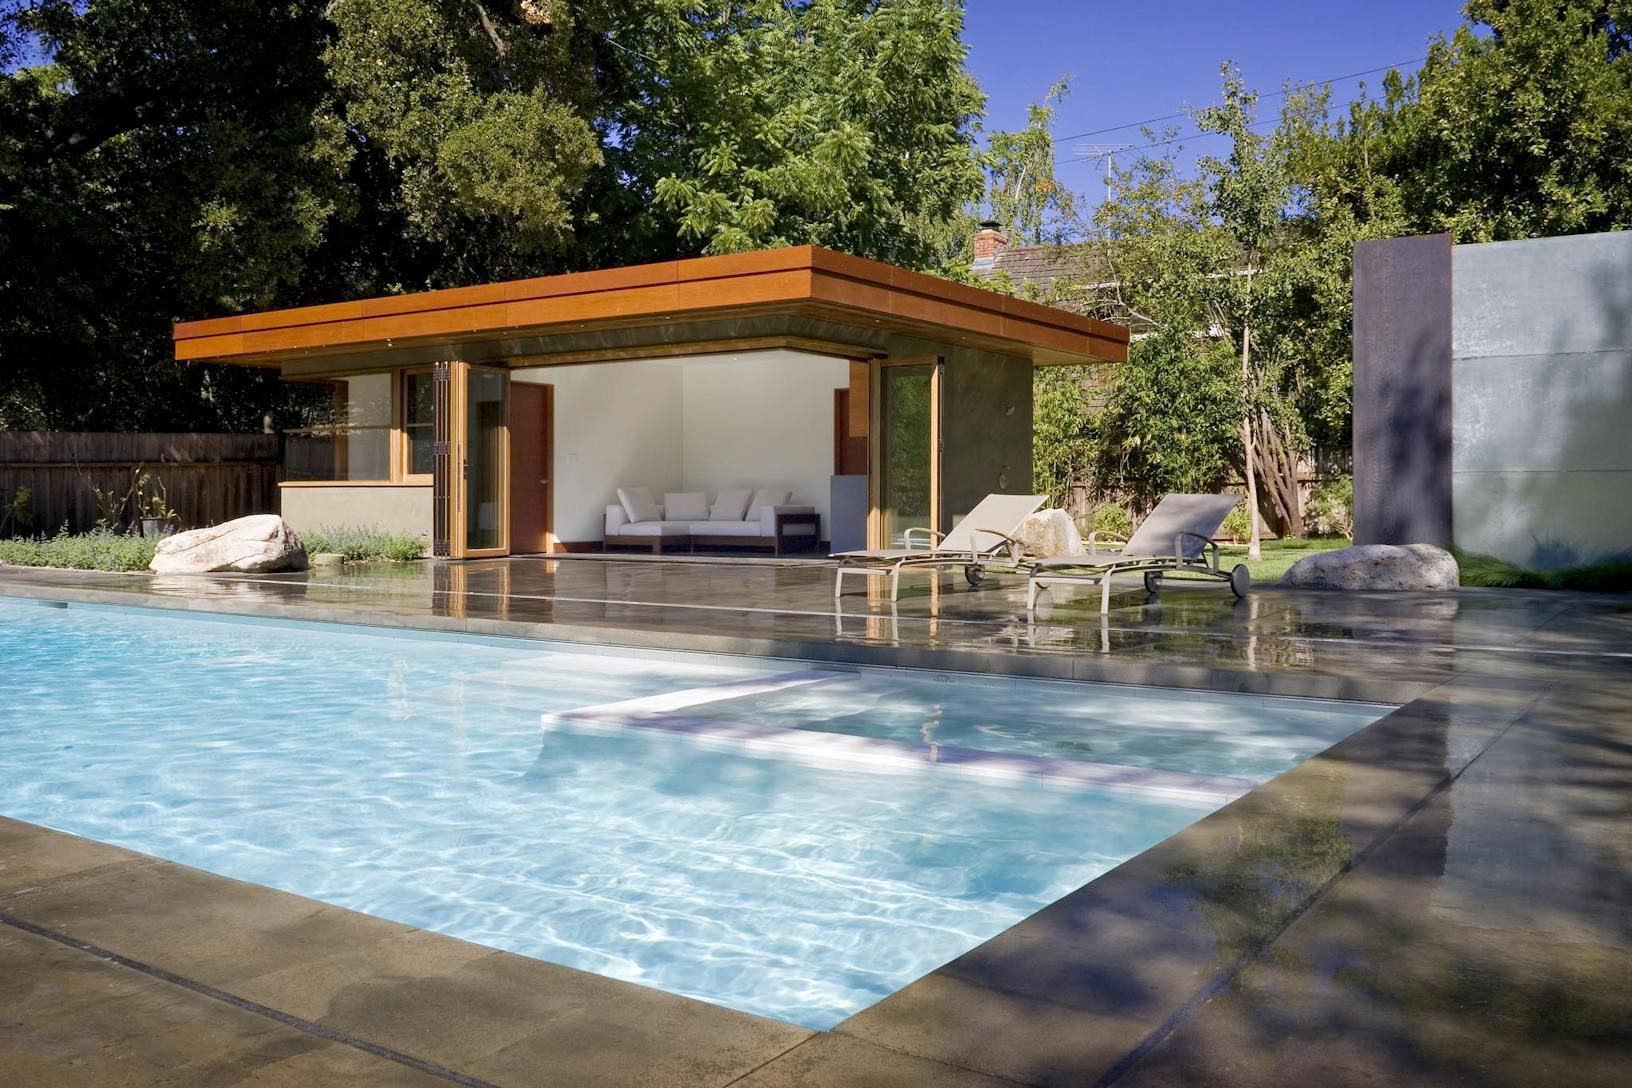 WD65 Residence with a pool and trees _ wood framed glass walls